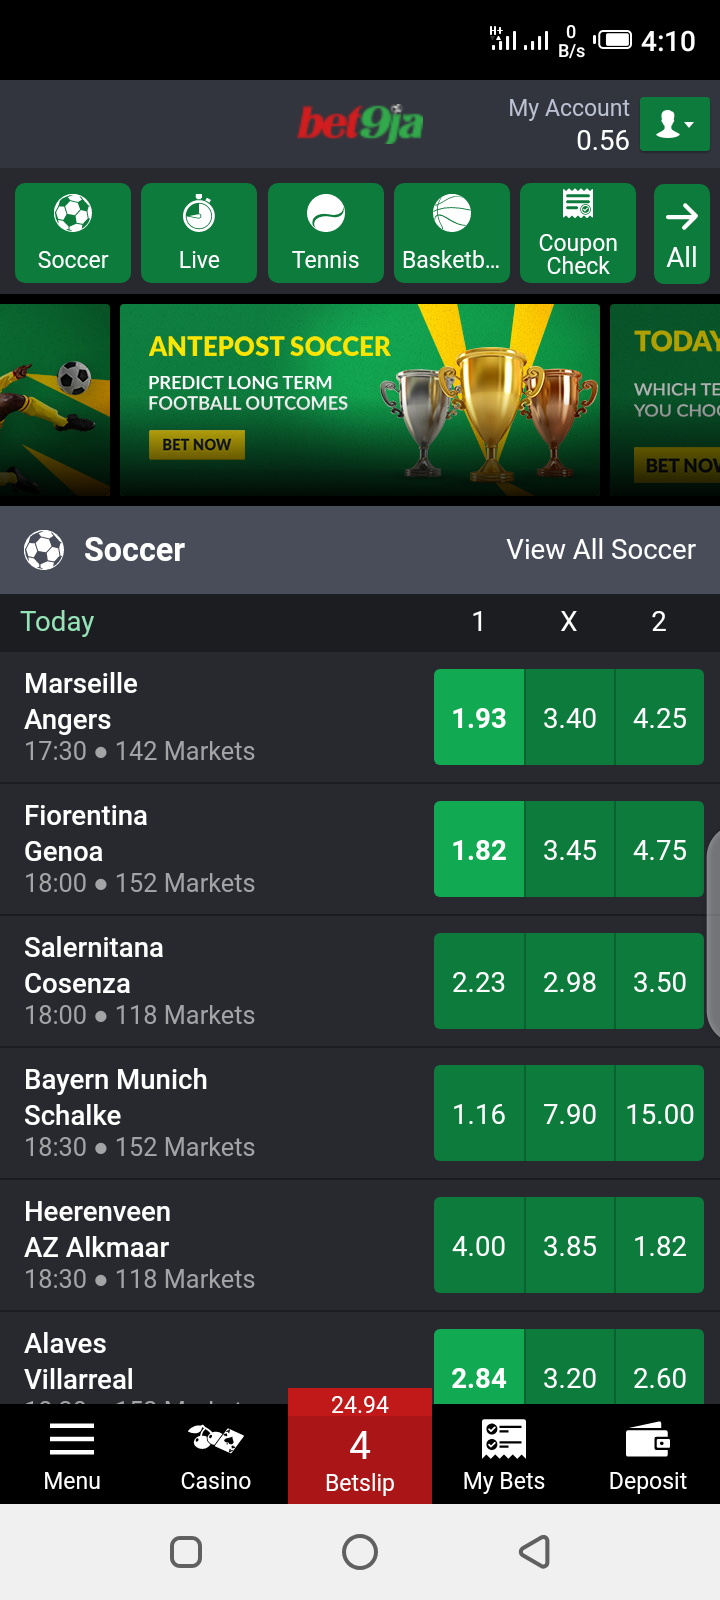 Download New Bet9ja Mobile App Apk for Android